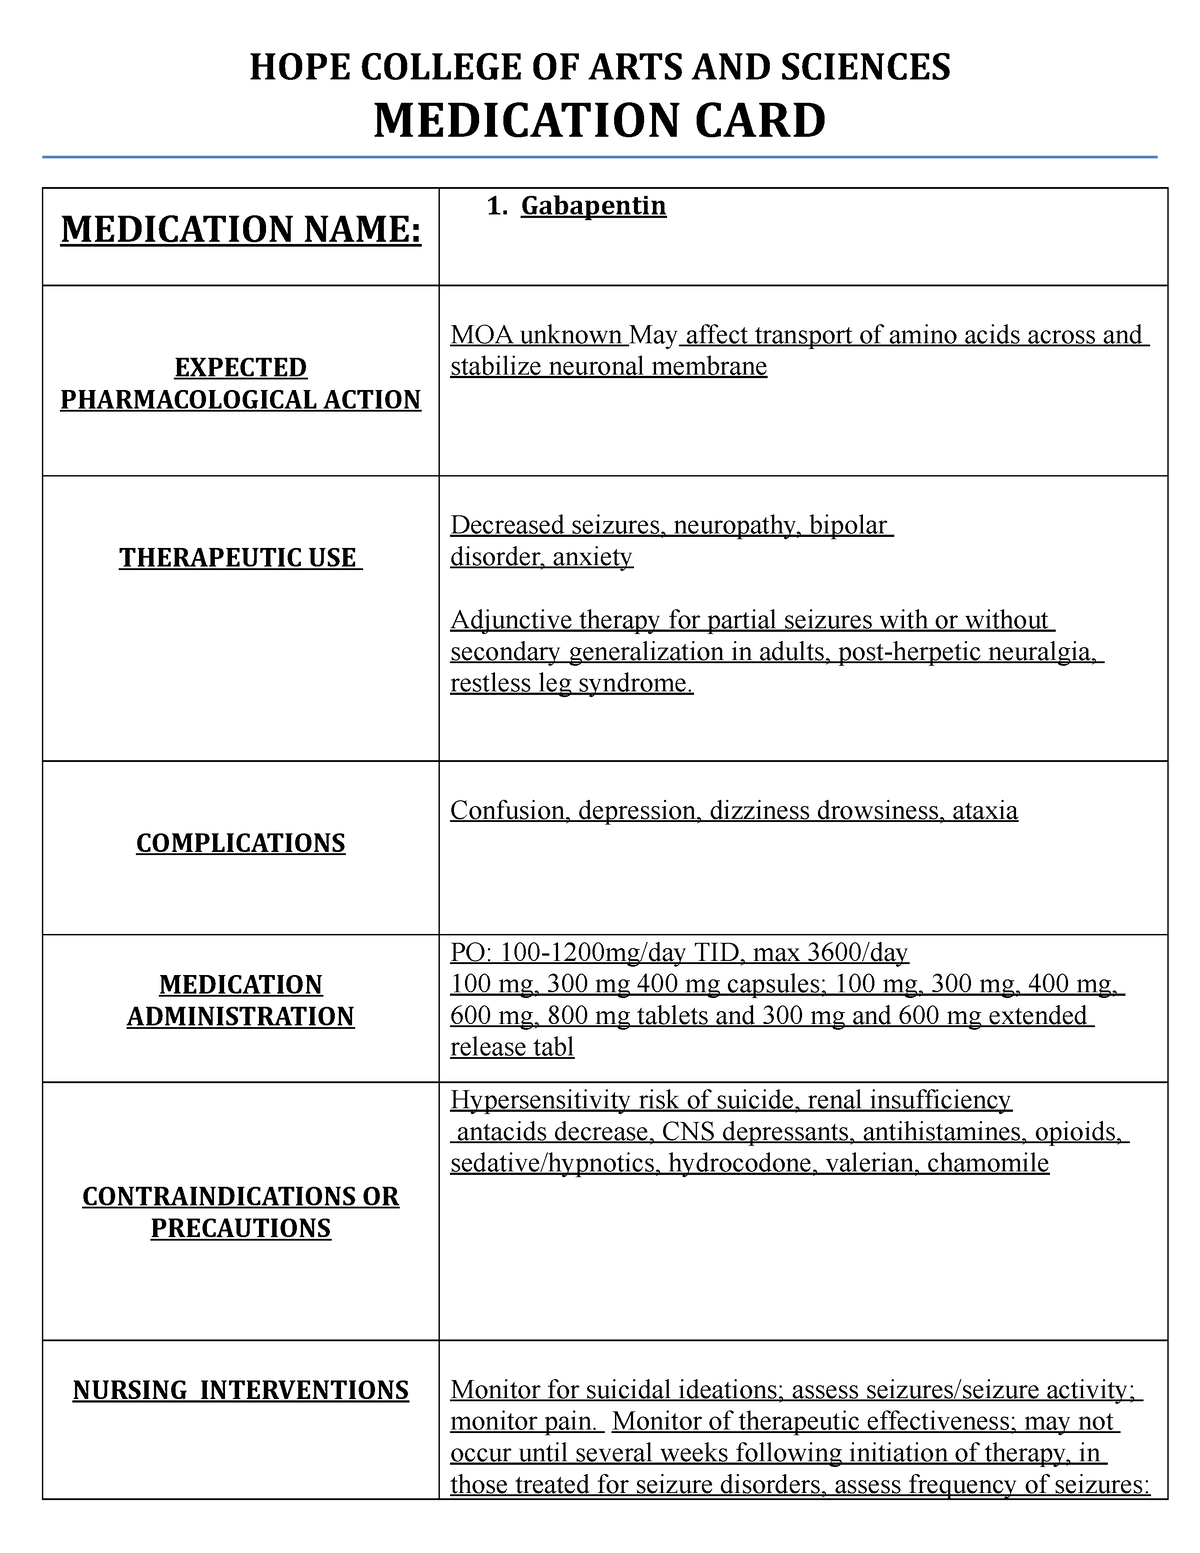 Gabapentin Medication Card Template HOPE COLLEGE OF ARTS AND SCIENCES